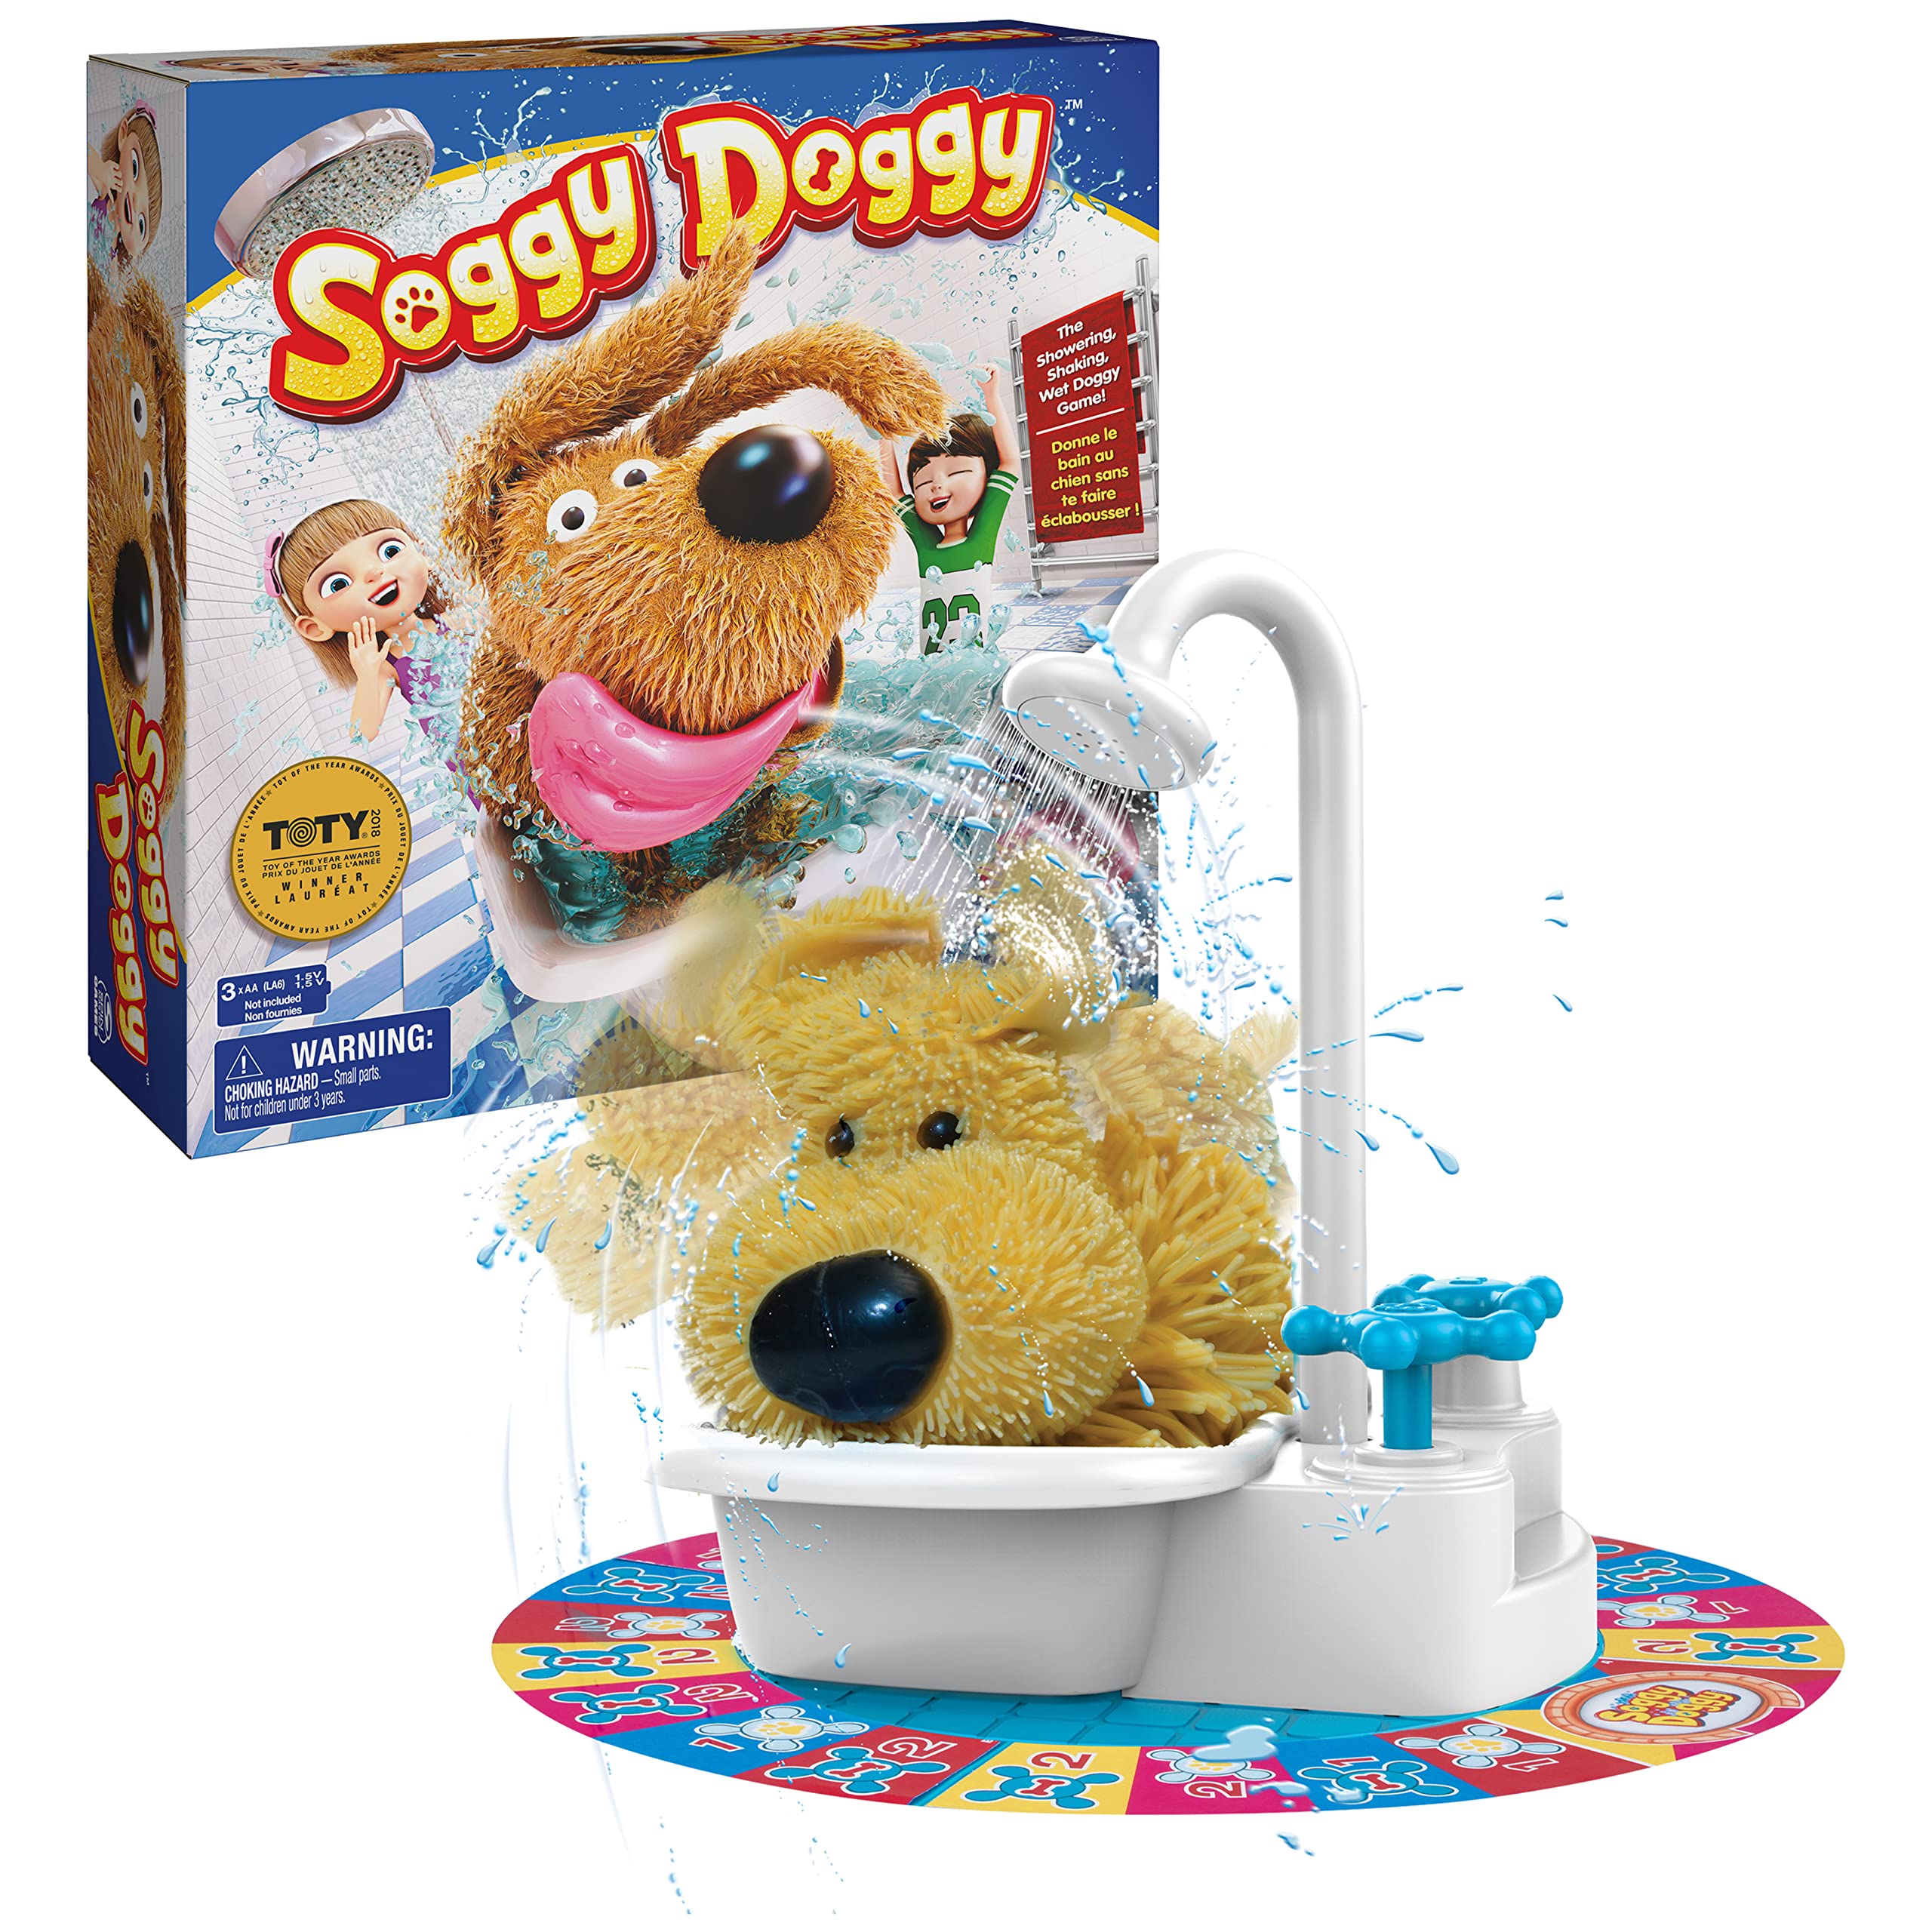 Soggy Doggy Showering & Shaking Wet Dog Board Game  $7.93 + Free Shipping w/ Prime or on $25+